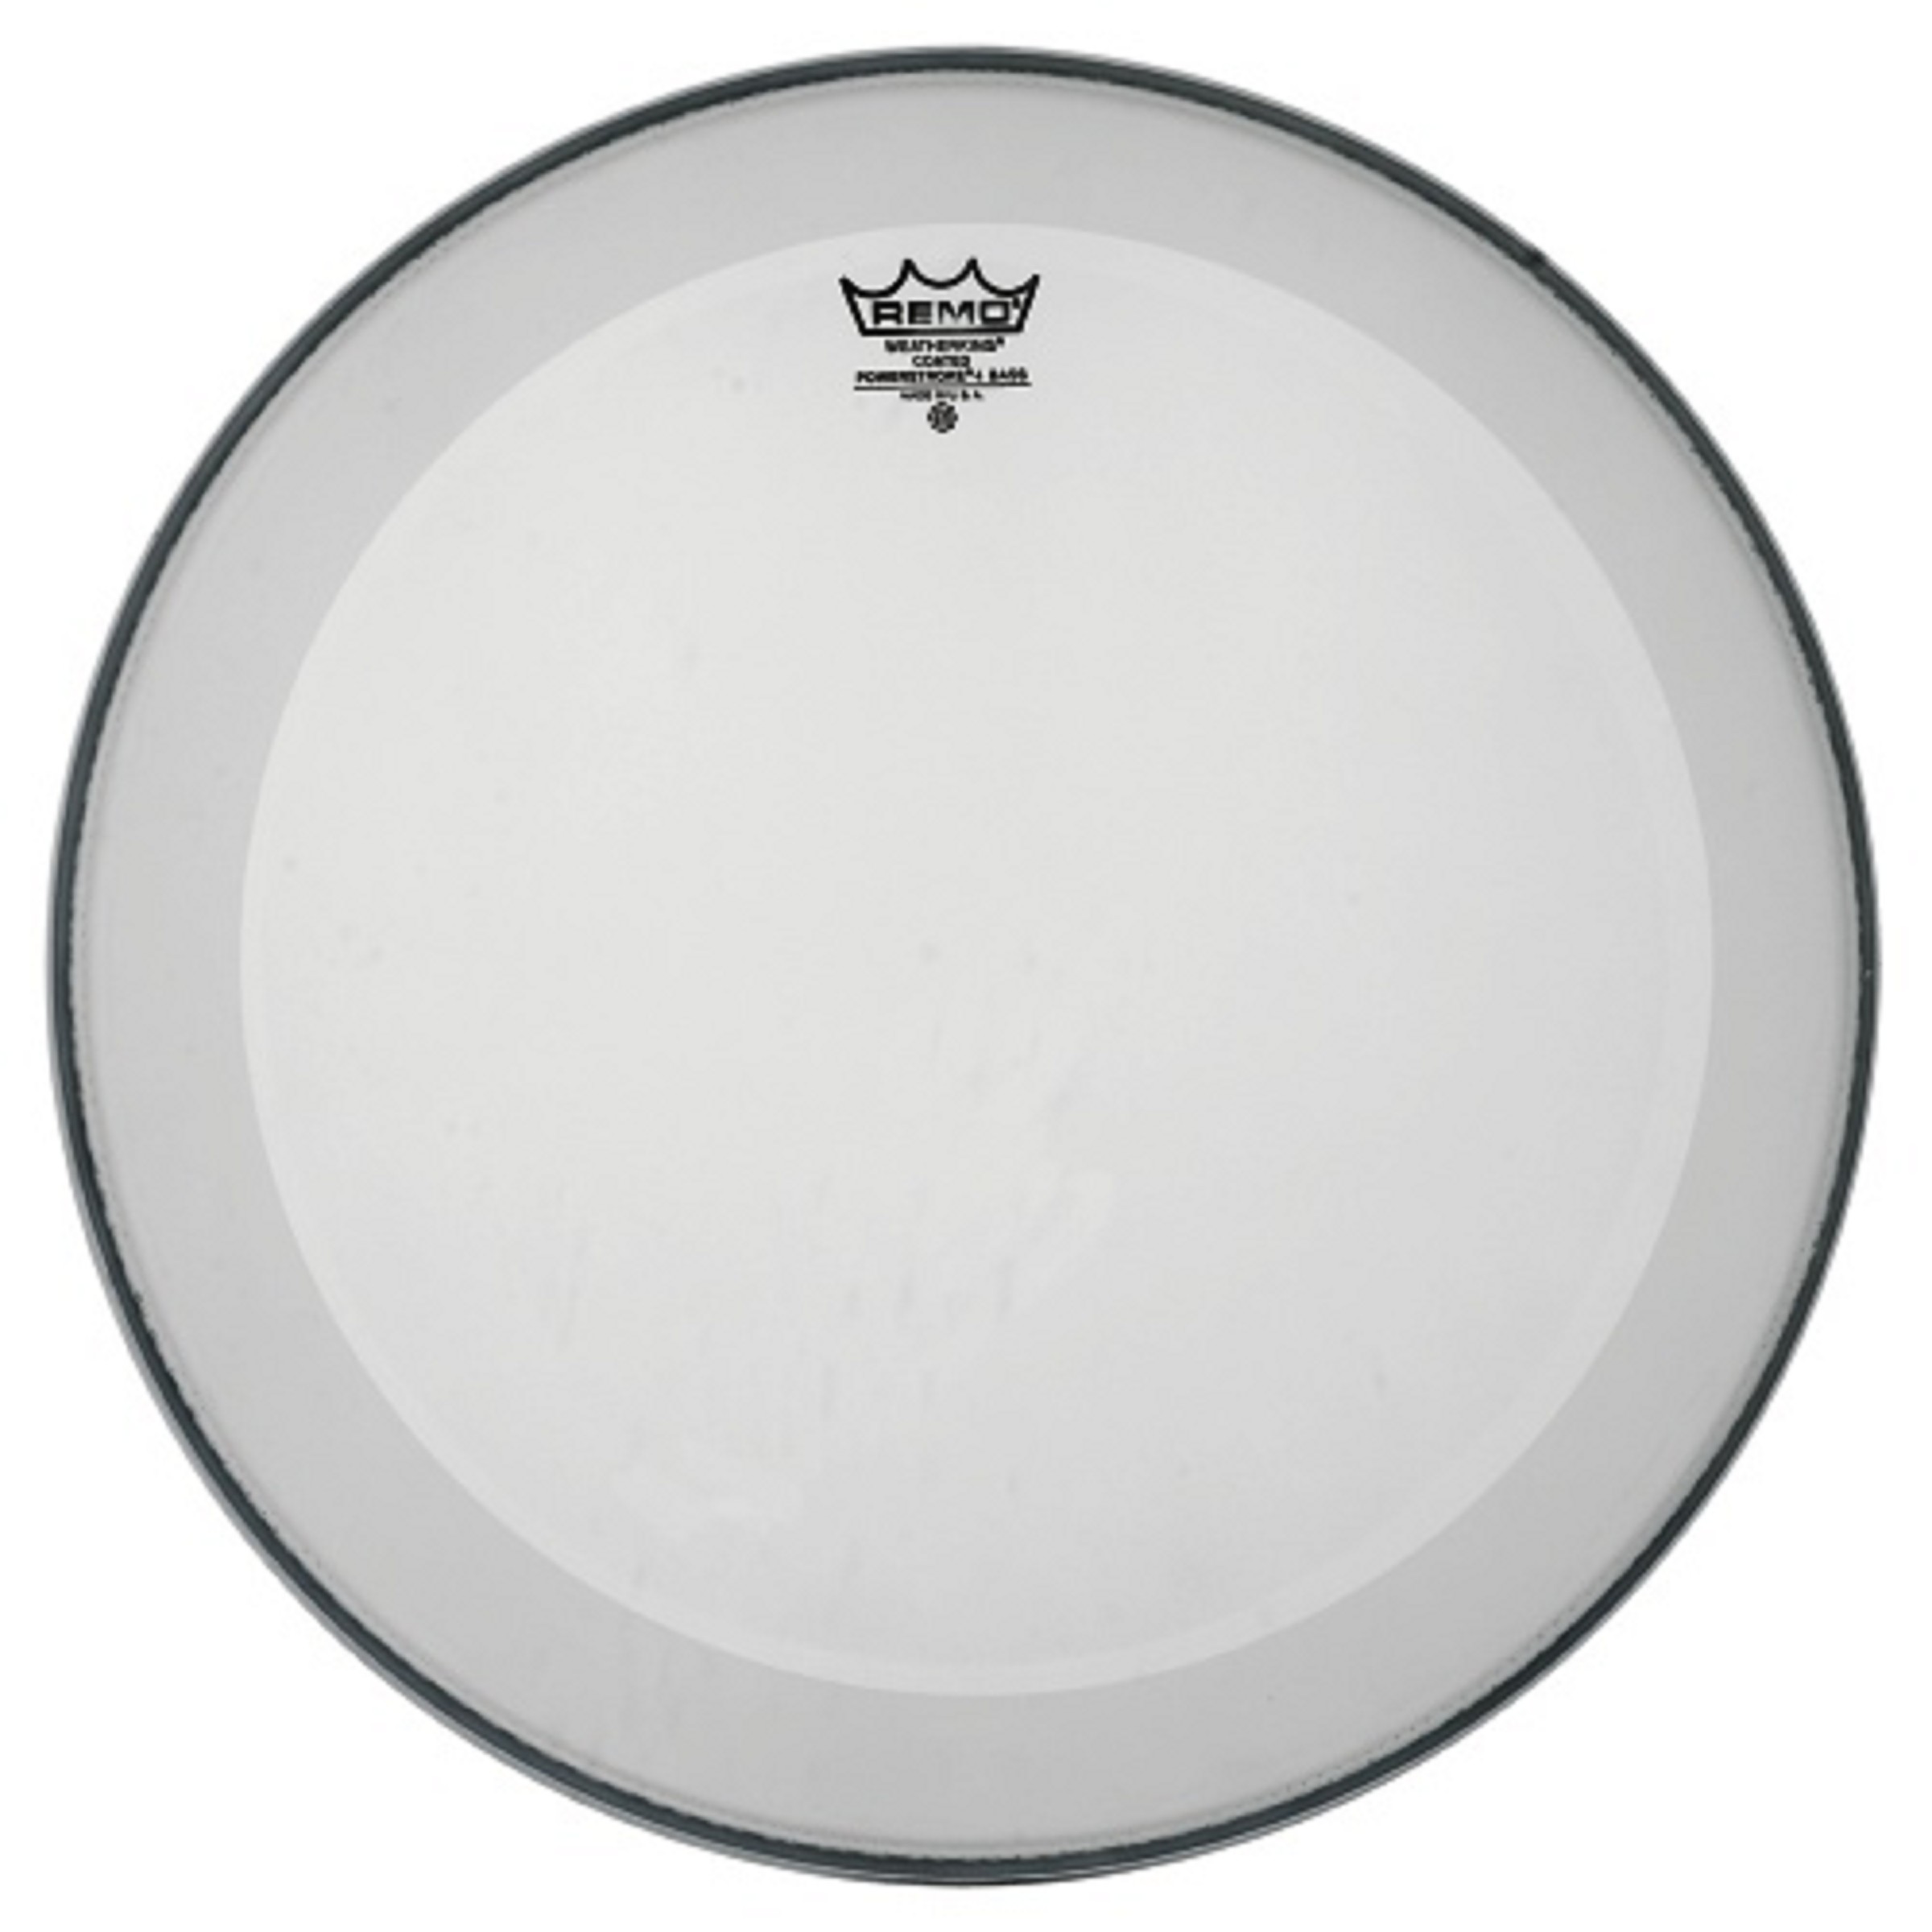 Remo Fell Powerstroke 4 18" Coated Bass Drum